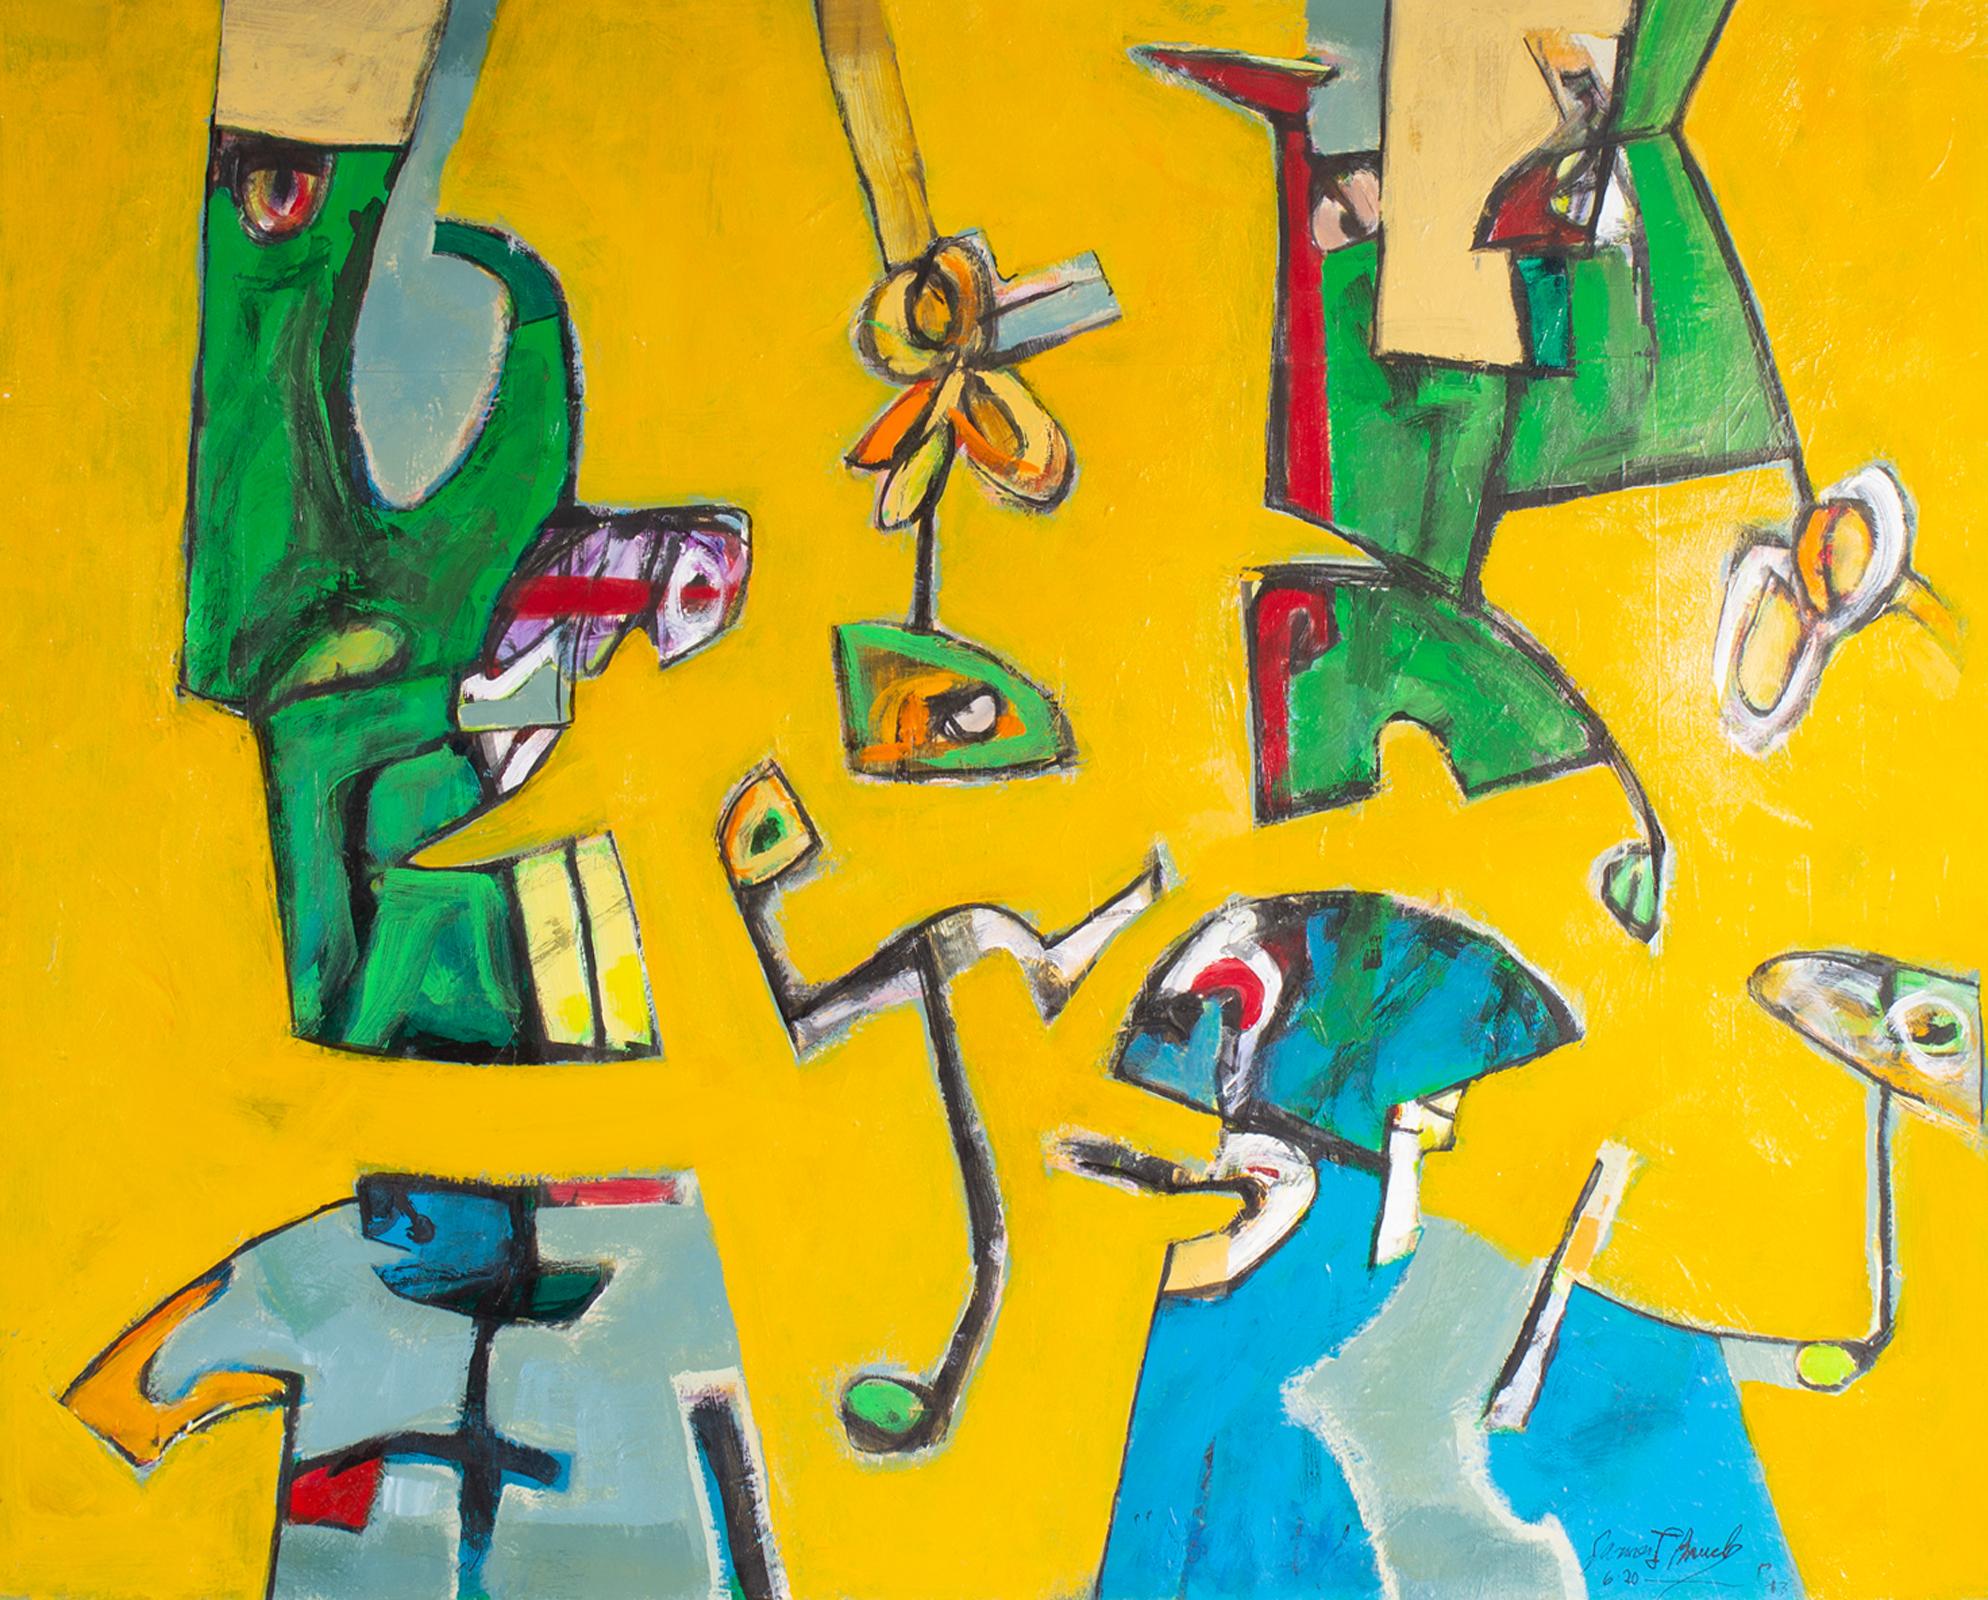 A 2013 acrylic on paper painting by the American artist James L. Bruch (1942-2023). A bright yellow background is punctuated with vibrant biomorphic blue, green, red, and gray shapes in this colorful abstract painting. Signed and dated to the lower